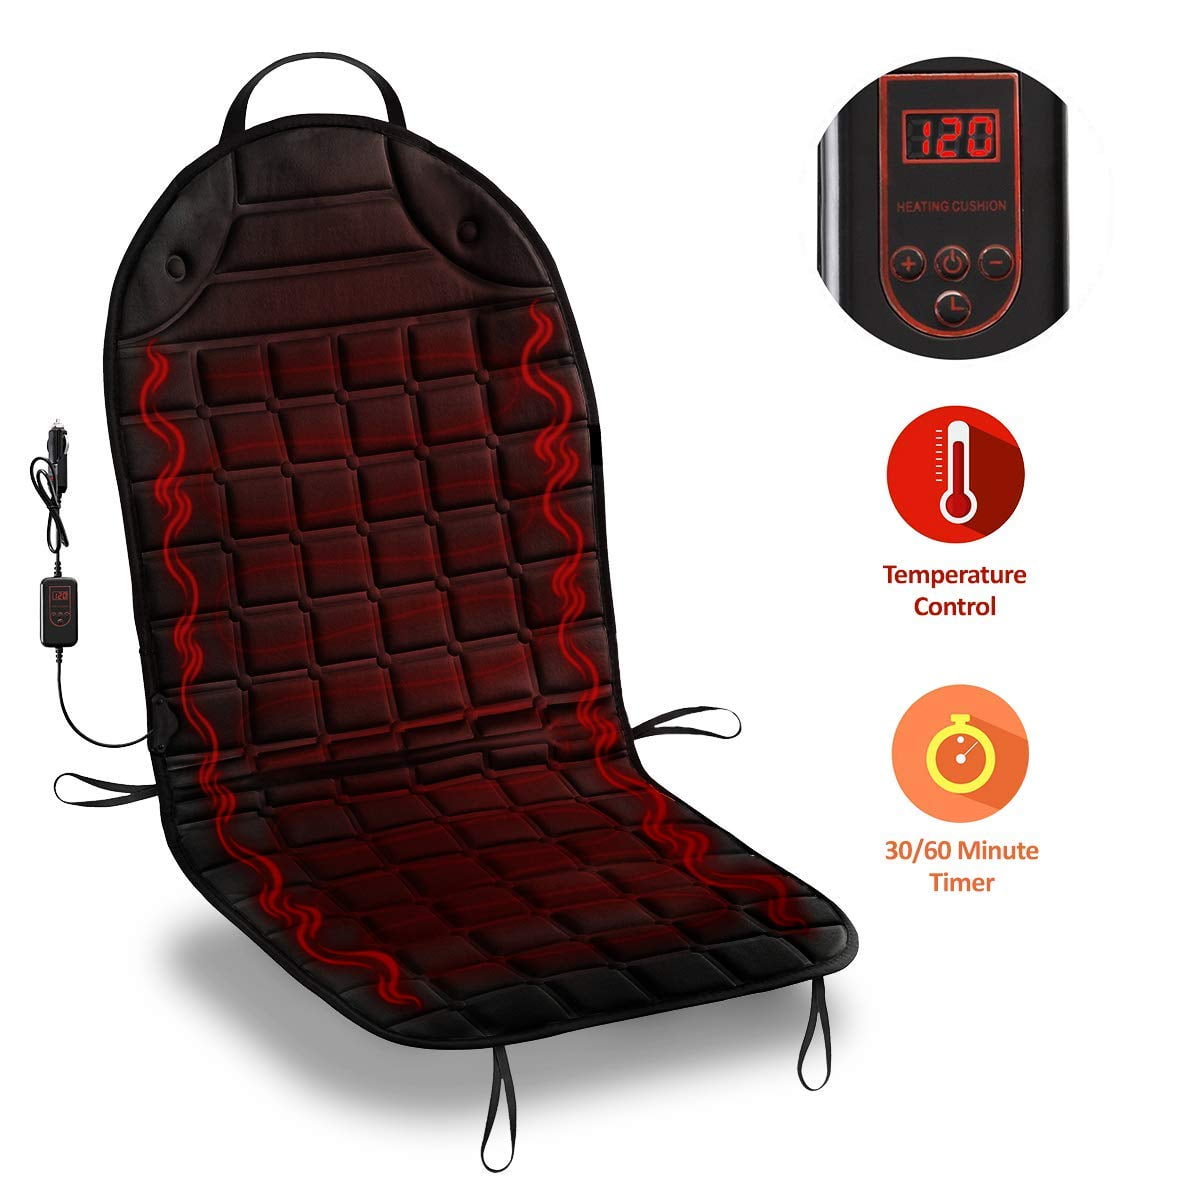 Merkts Winter Car Heating Seat Cushion,Breathable Leather Car Constant Temperature Universal Seat Cushion,Fast Heating Pad for Home Car Office Chair